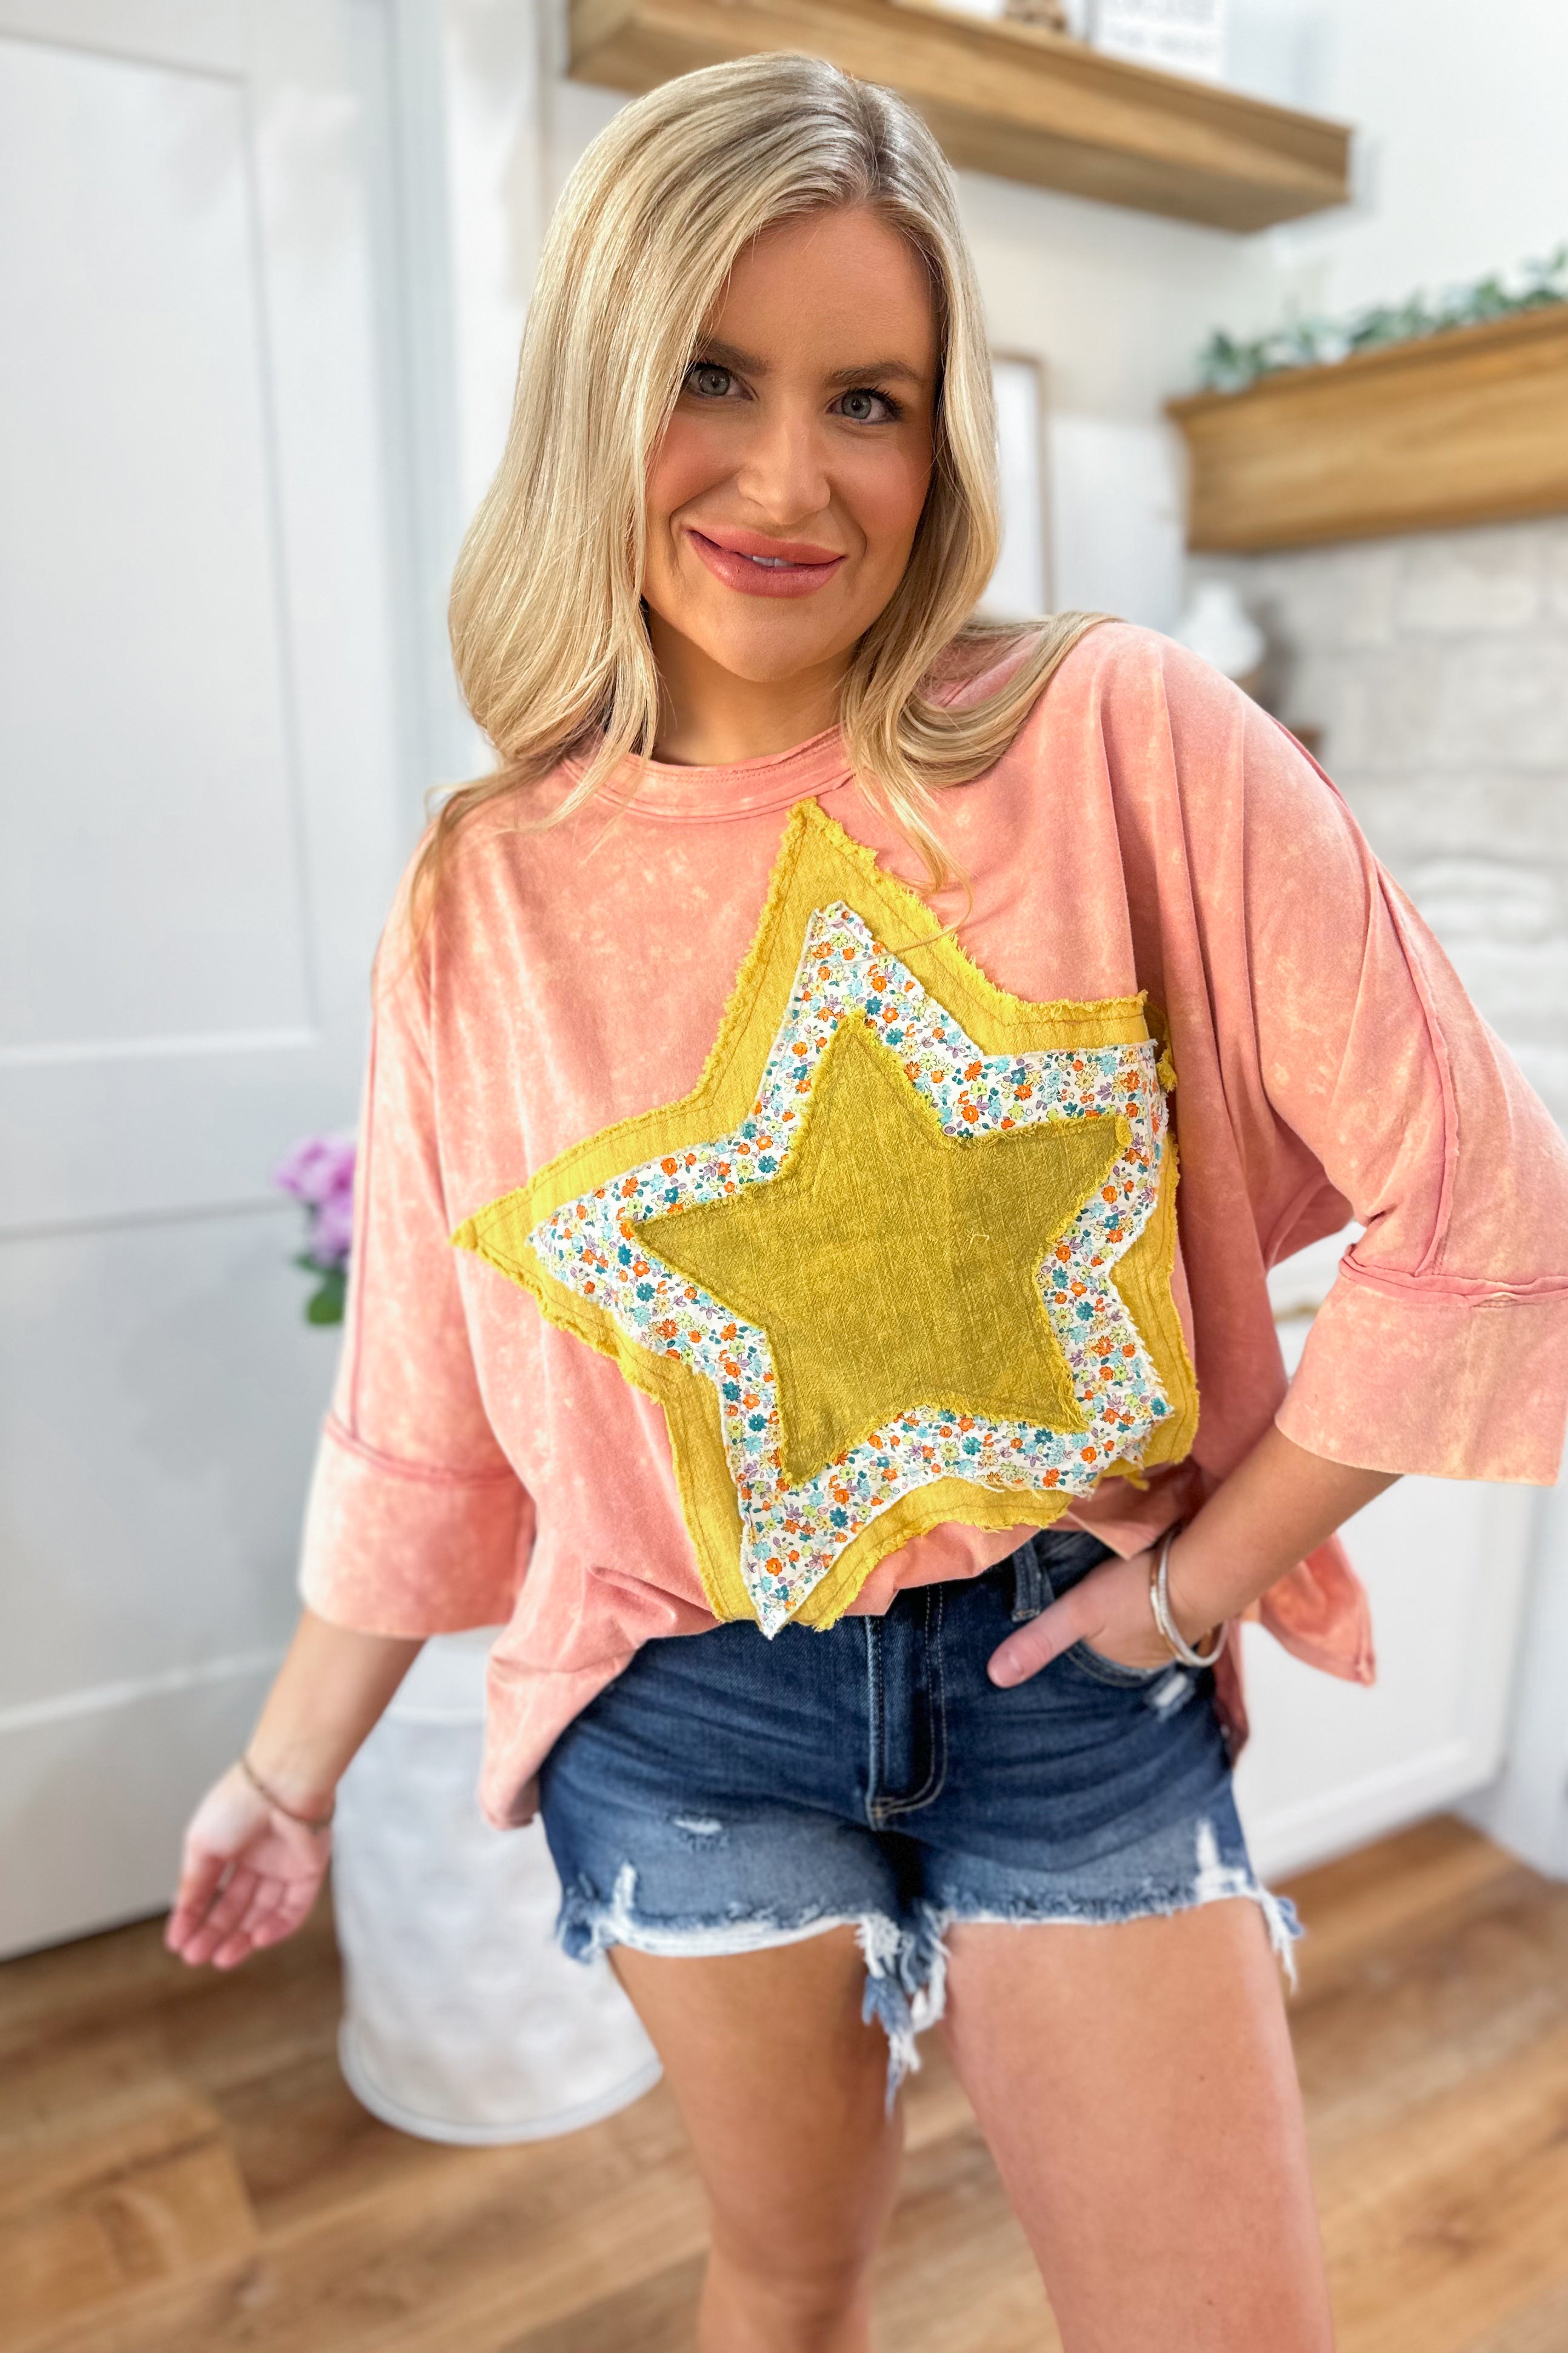 Peachy Keen Half Sleeve Cotton Slub Star Patch Top - Be You Boutique